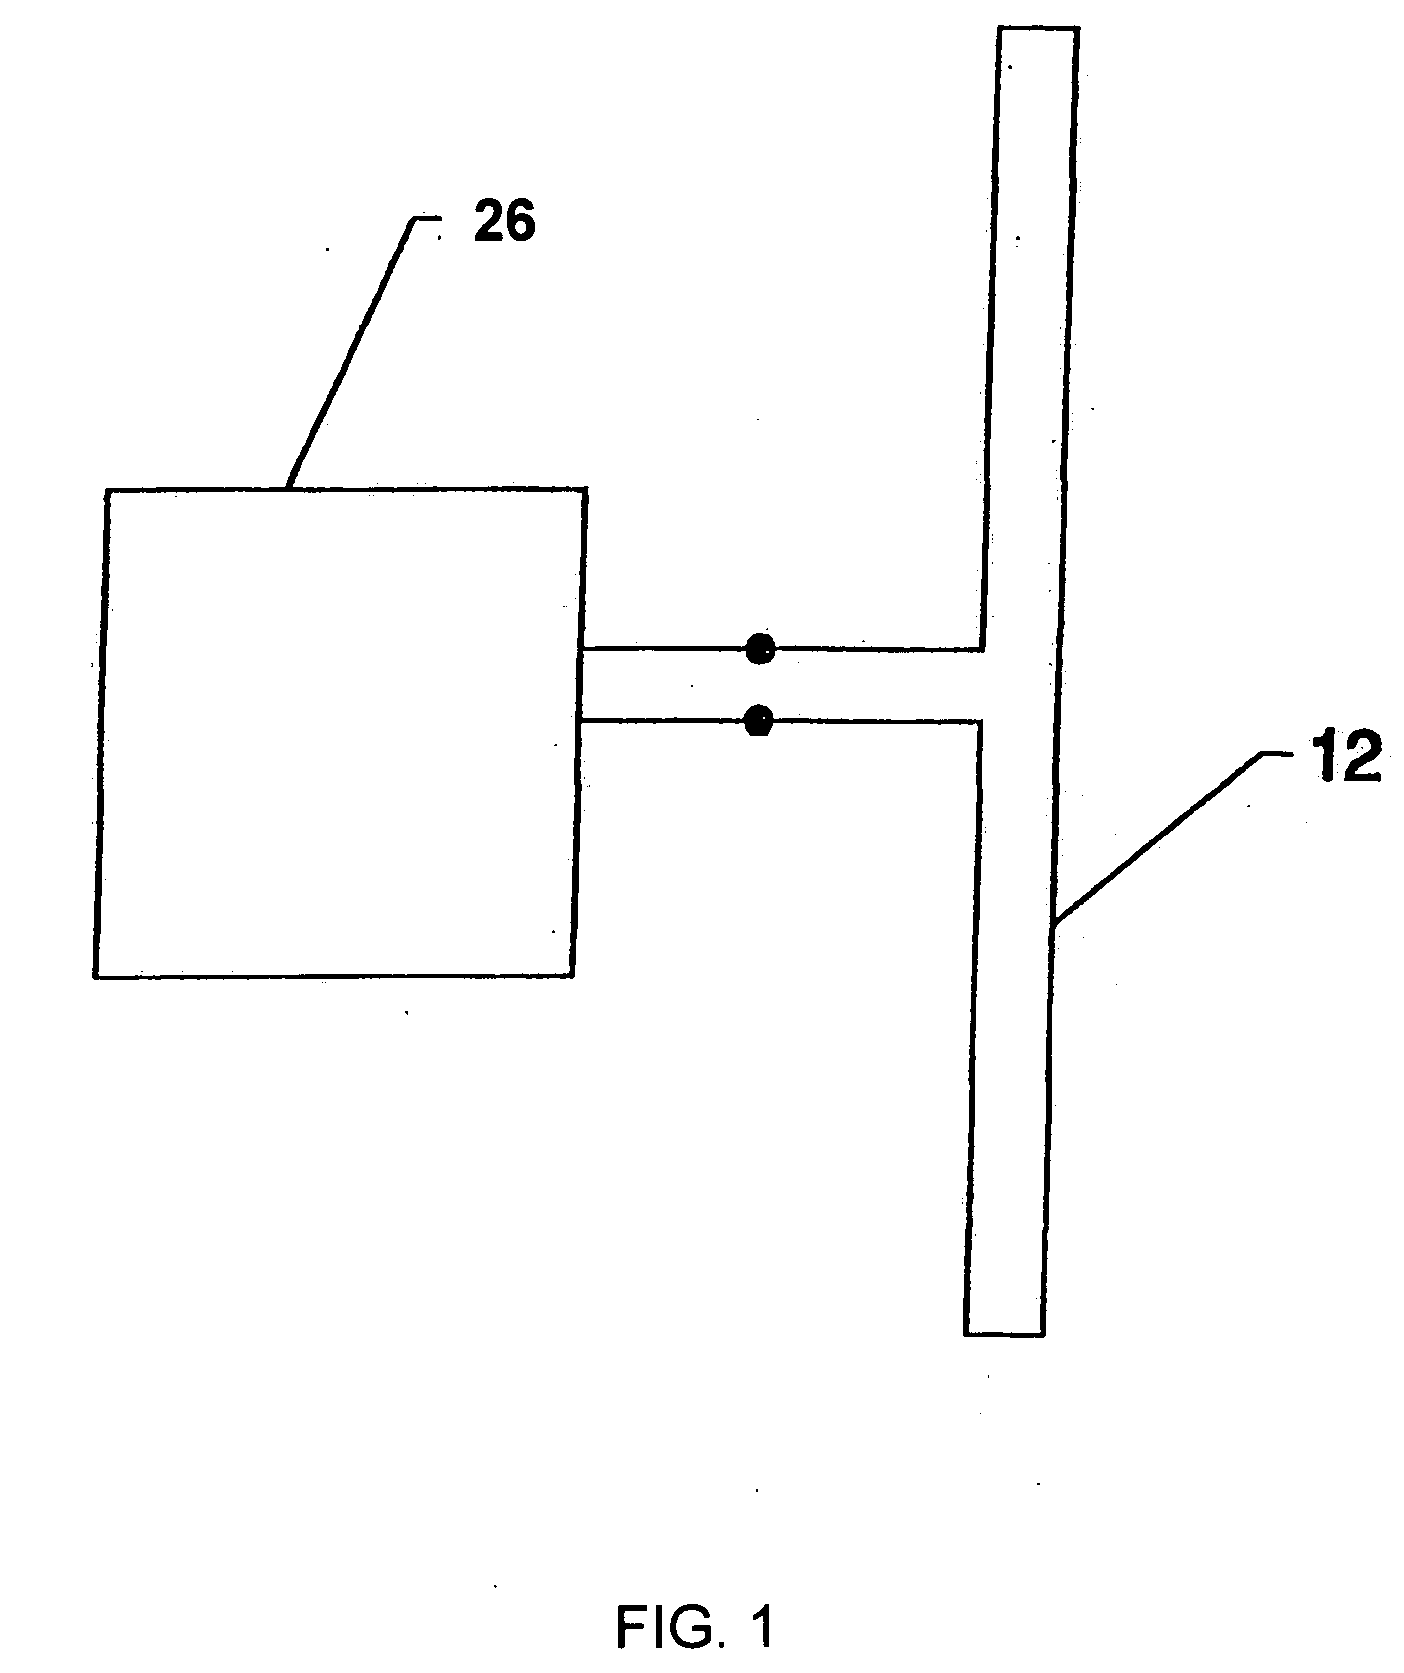 Process for manufacture of novel, inexpensive radio frequency identification devices